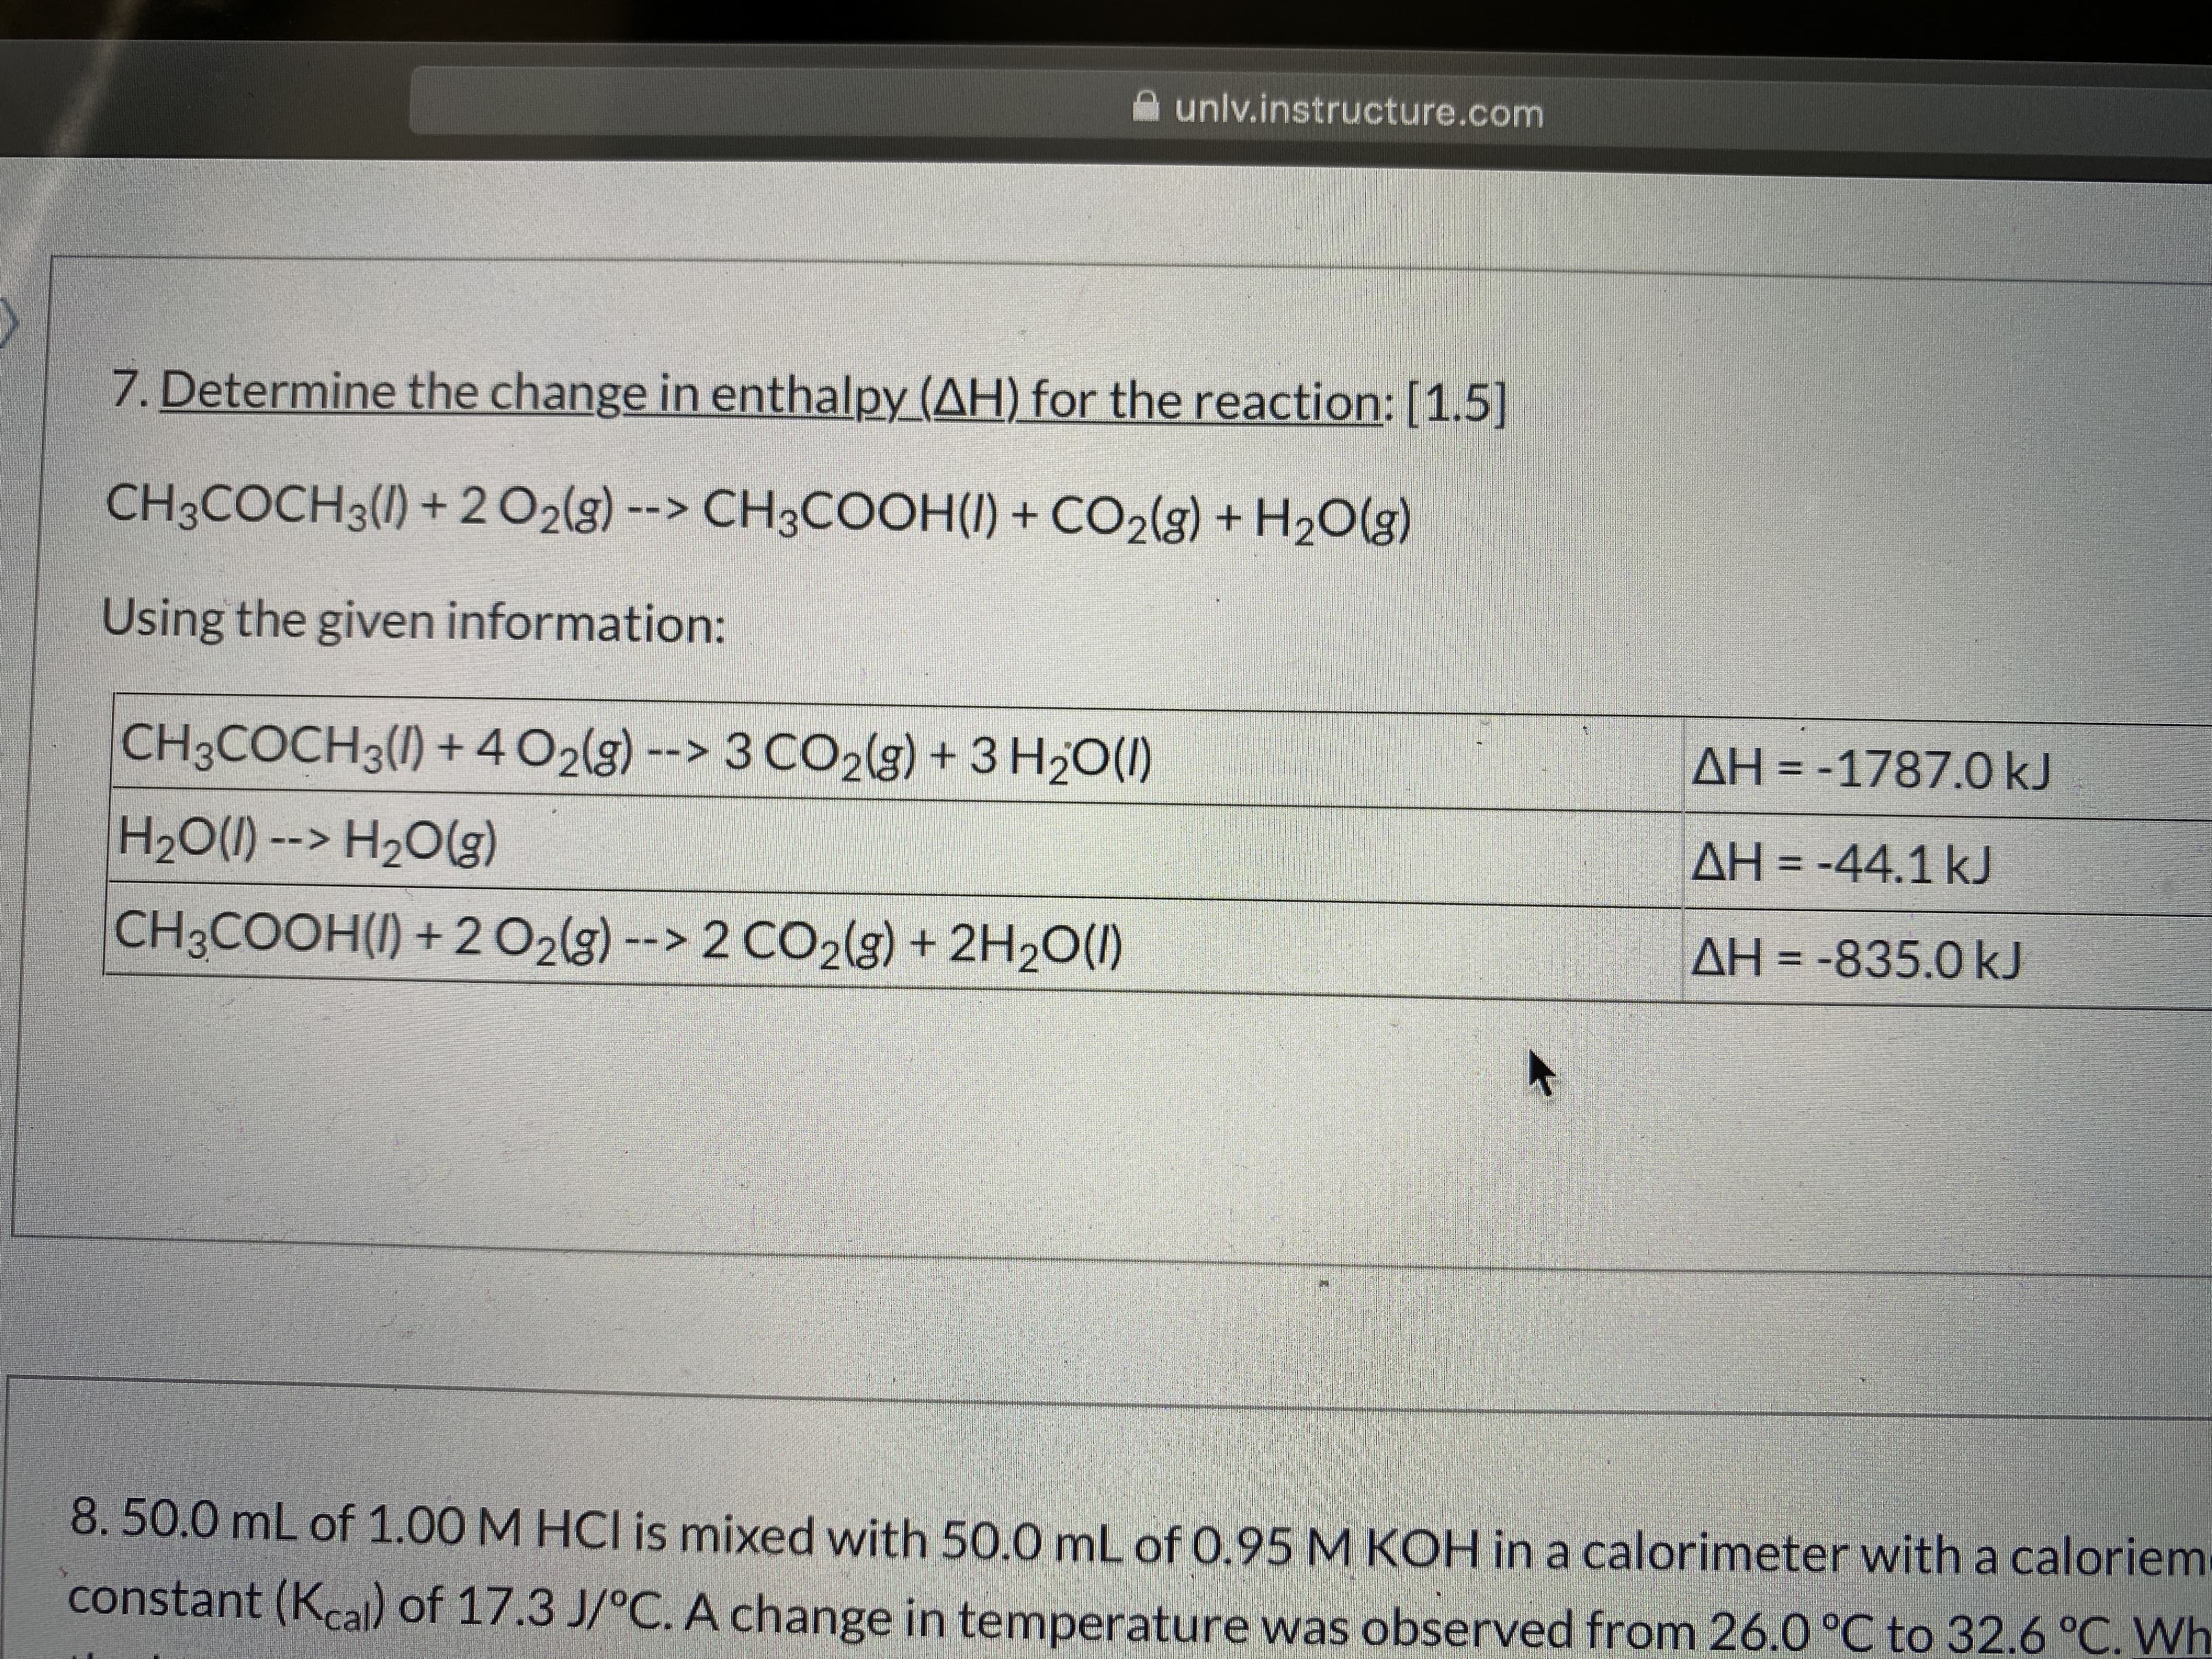 unlv.instructure.com
7. Determine the change in enthalpy (AH) for the reaction:[1.5]
CH3COCH3(1) +202(g) --> CH3COOH(I) + CO2(g) + H2O(g)
Using the given information:
CH3COCH3(1) +4 O2(g) --> 3 CO2(g) + 3 H20(I)
AH = -1787.0 kJ
H20(1) --> H2O(g)
AH = -44.1 kJ
CH3COOH(I) + 2 02(g) --> 2 CO2(g) + 2H2O(1)
AH = -835.0 kJ
8.50.0 mL of 1.00 M HCI is mixed with 50.0 mL of 0.95 M KOH in a calorimeter with a caloriem
constant (Kcall) of 17.3 J/°C. A change in temperature was observed from 26.0 °C to 32.6 °C. Wh
